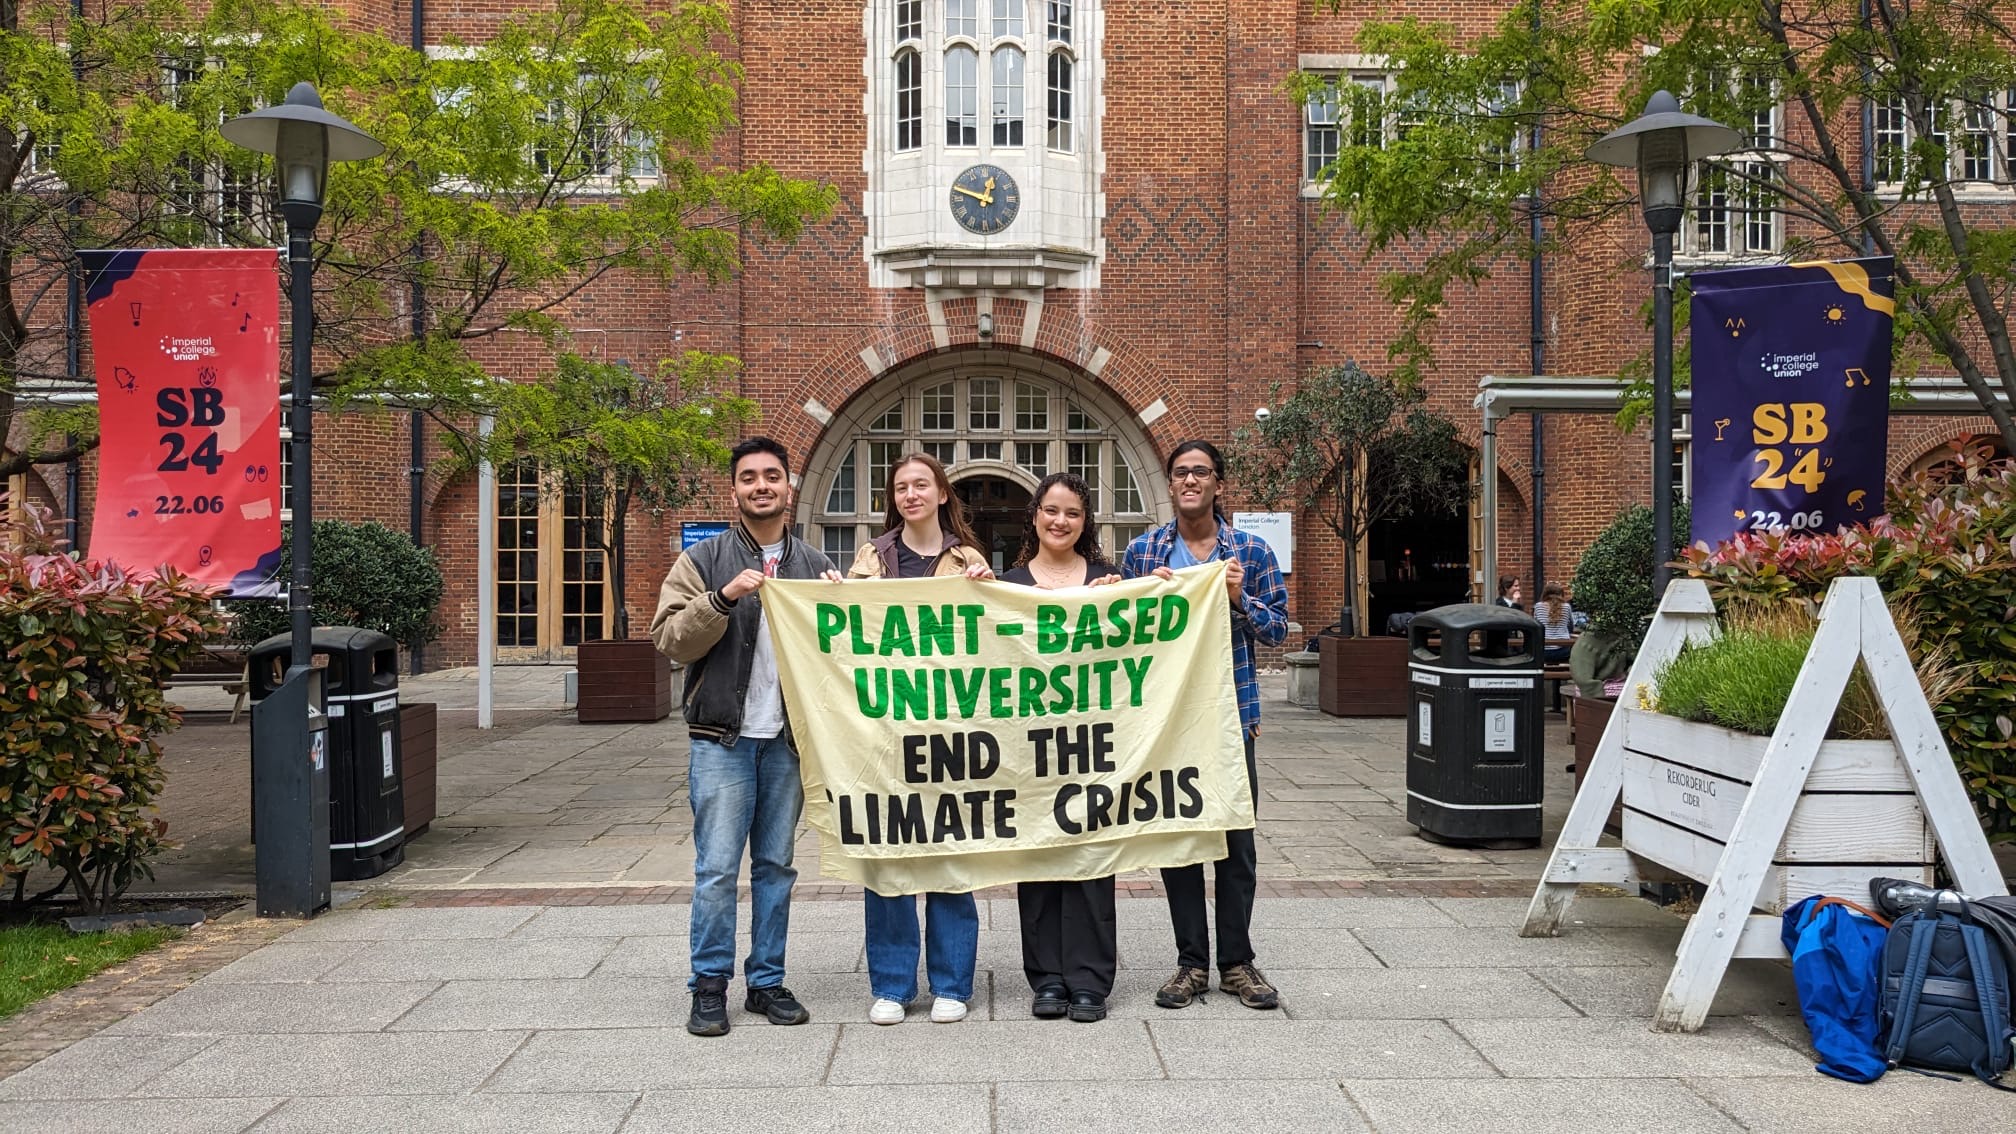 PBU Campaigners stand outside Imperial College Union holding banner which reads "PLANT-BASED UNIVERSITIES END THE CLIMATE CRISIS"